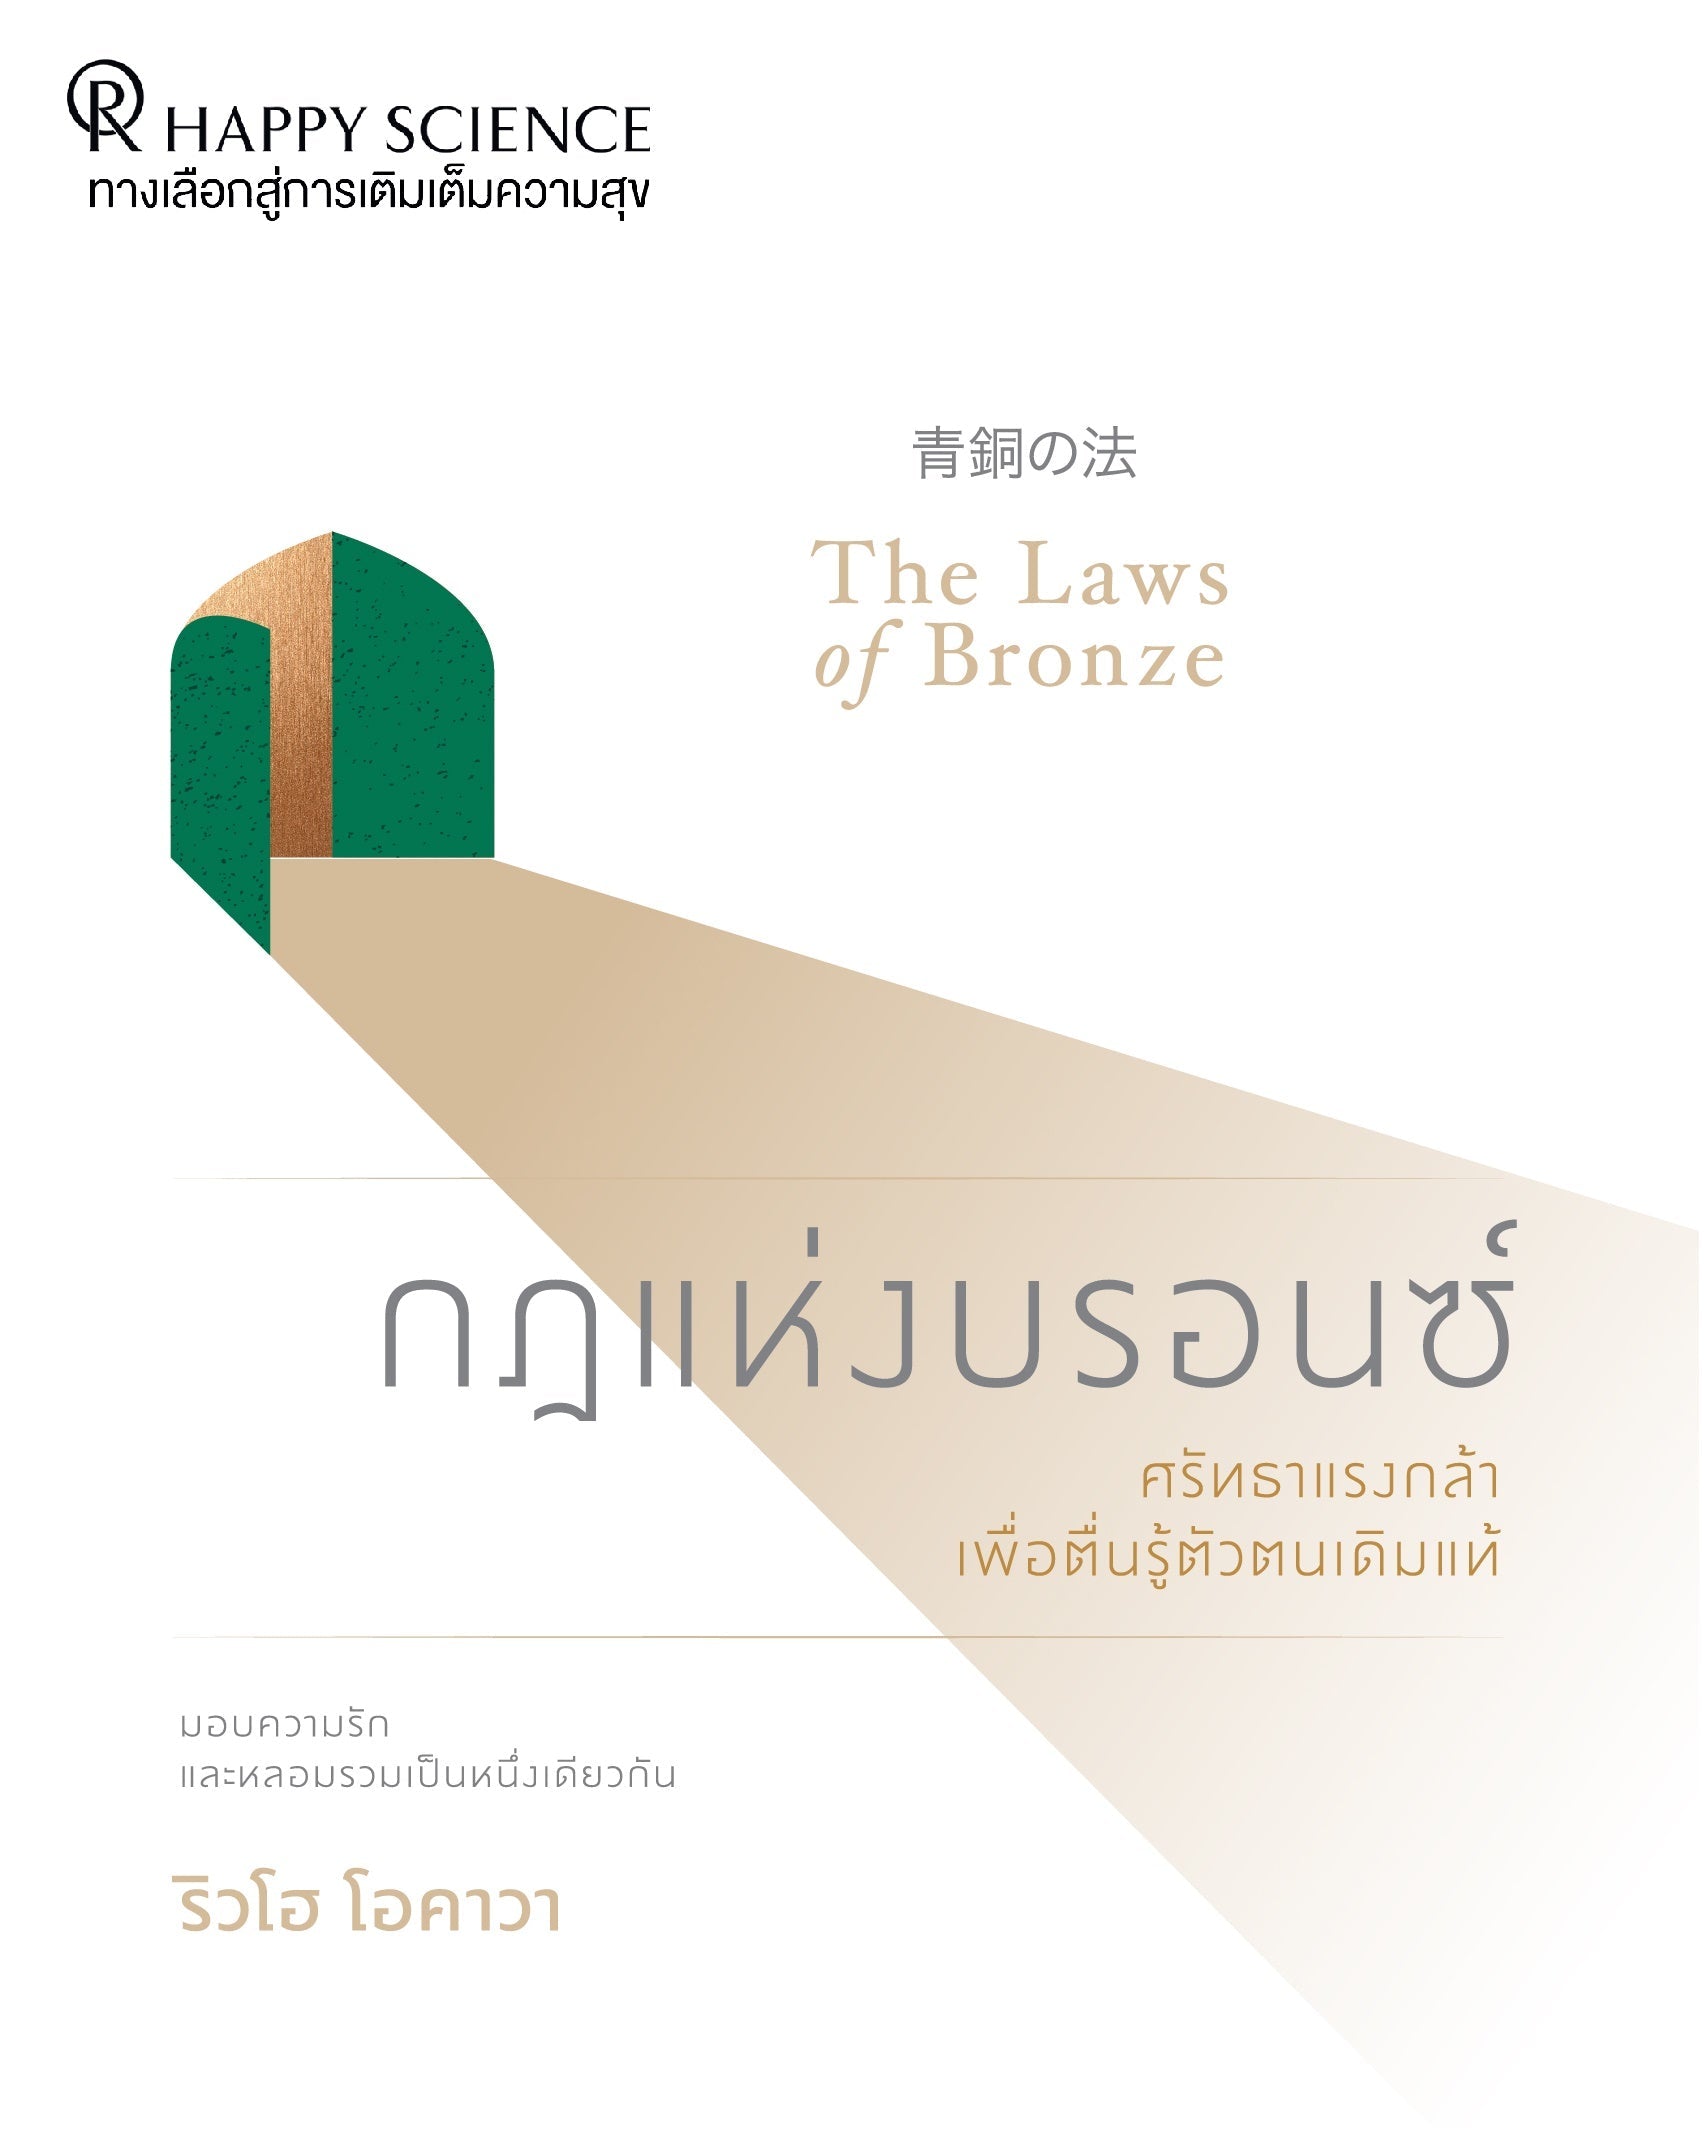 Book, The Laws of Bronze : Love One Another, Become One People, Ryuho Okawa, Thai - IRH Press International